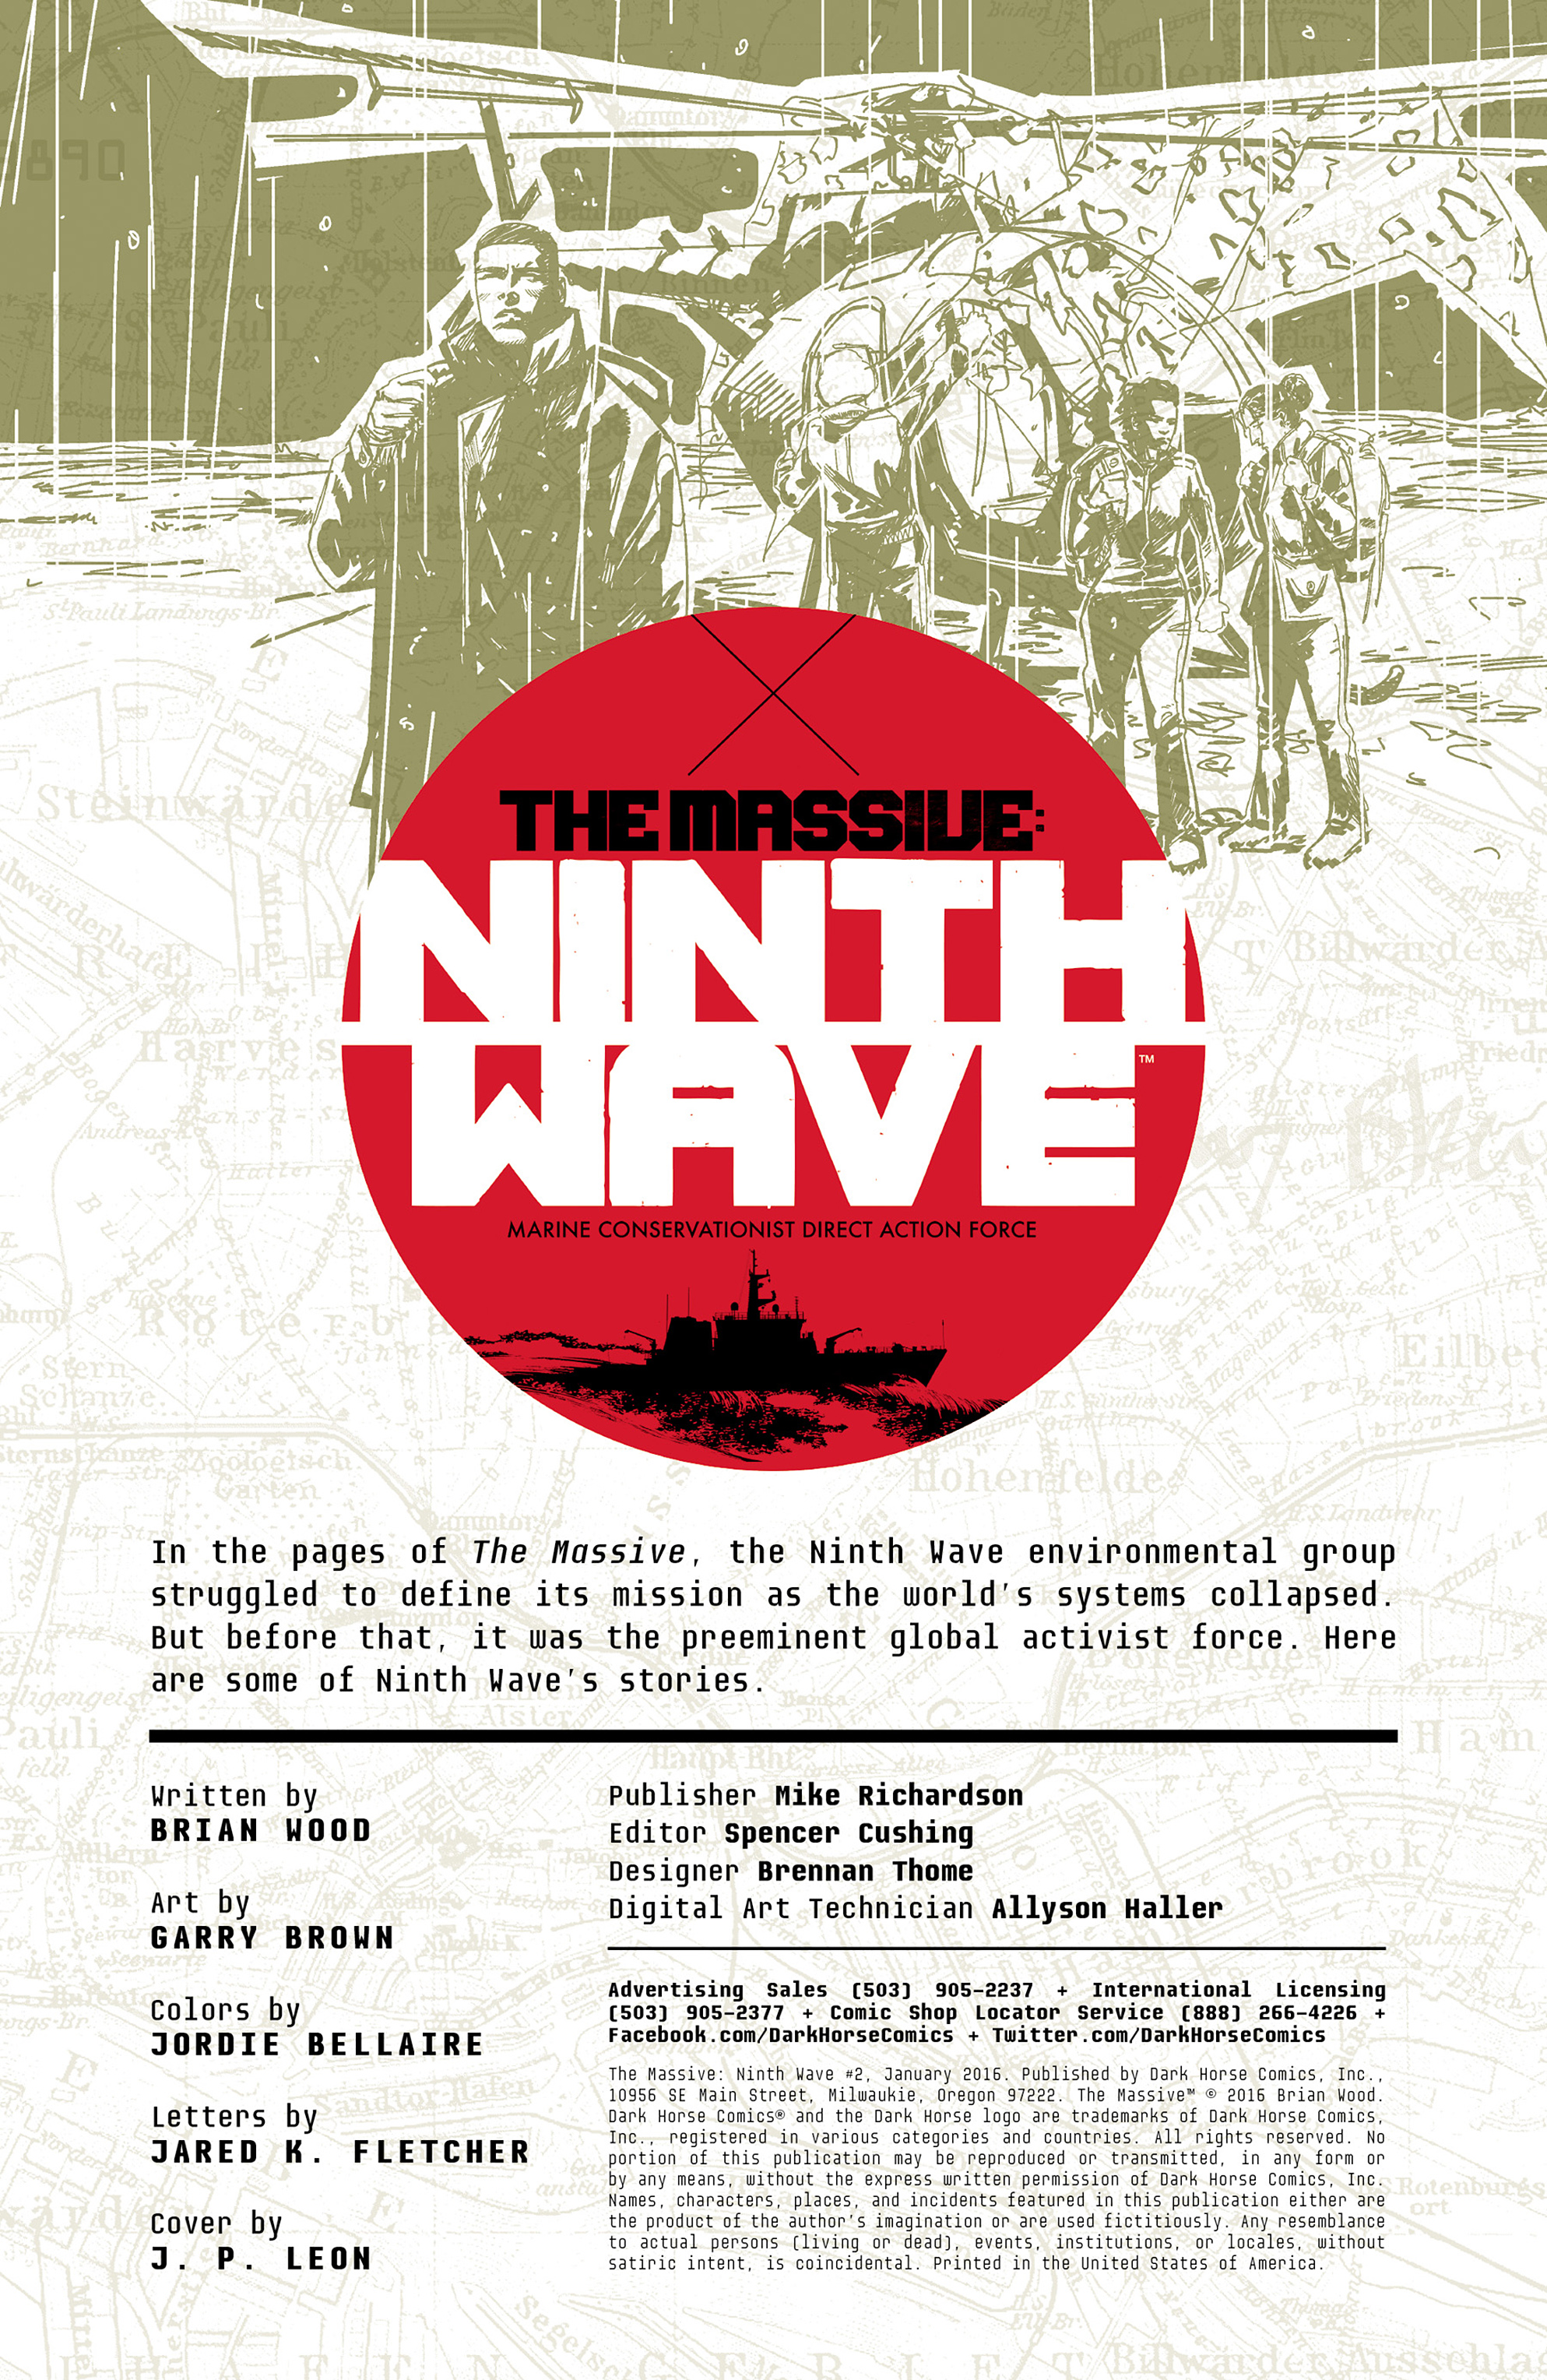 Read online The Massive: Ninth Wave comic -  Issue #2 - 2